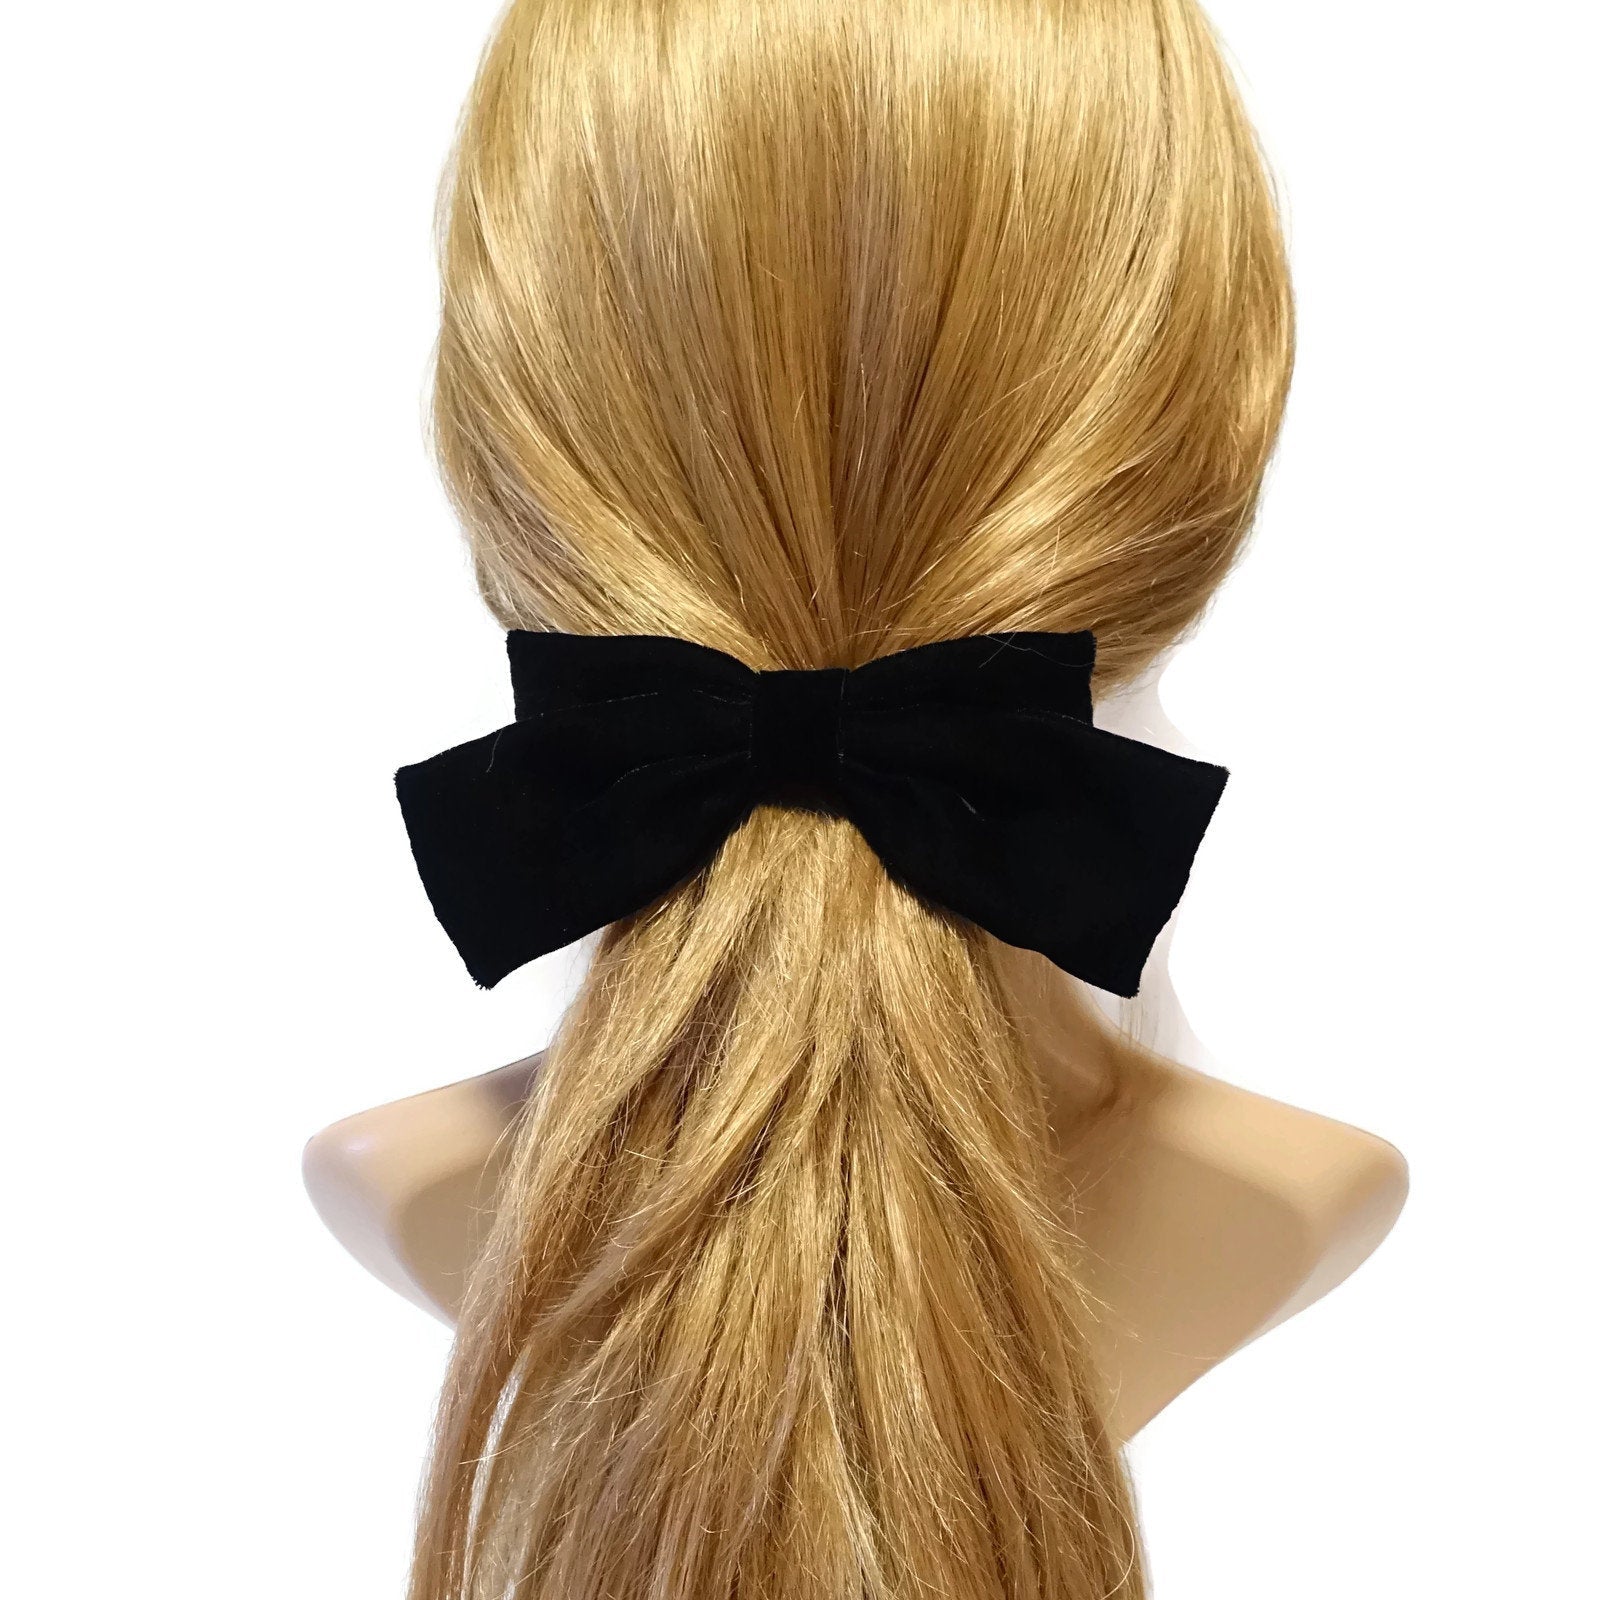 veryshine.com Barrette (Bow) Small bow barrette Handmade Black Silk Velvet Hair Bow Collection Claw Clip French Barrette Series Black Bow Hair Accessories